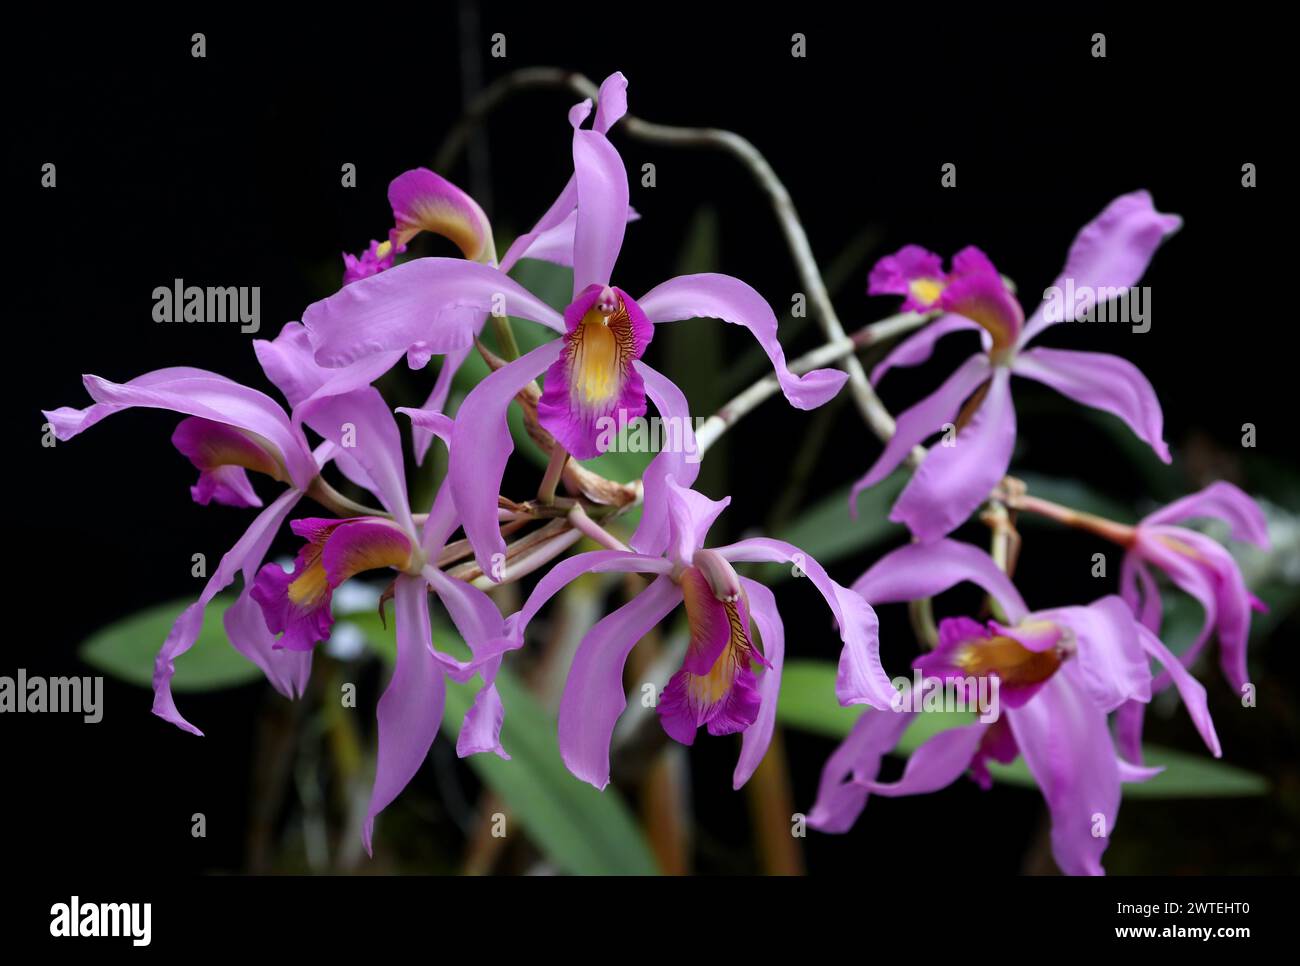 Laelia superbiens, Orchidaceae. Laelia superbiens is a species of orchid native to Mexico, Guatemala and Honduras. Stock Photo